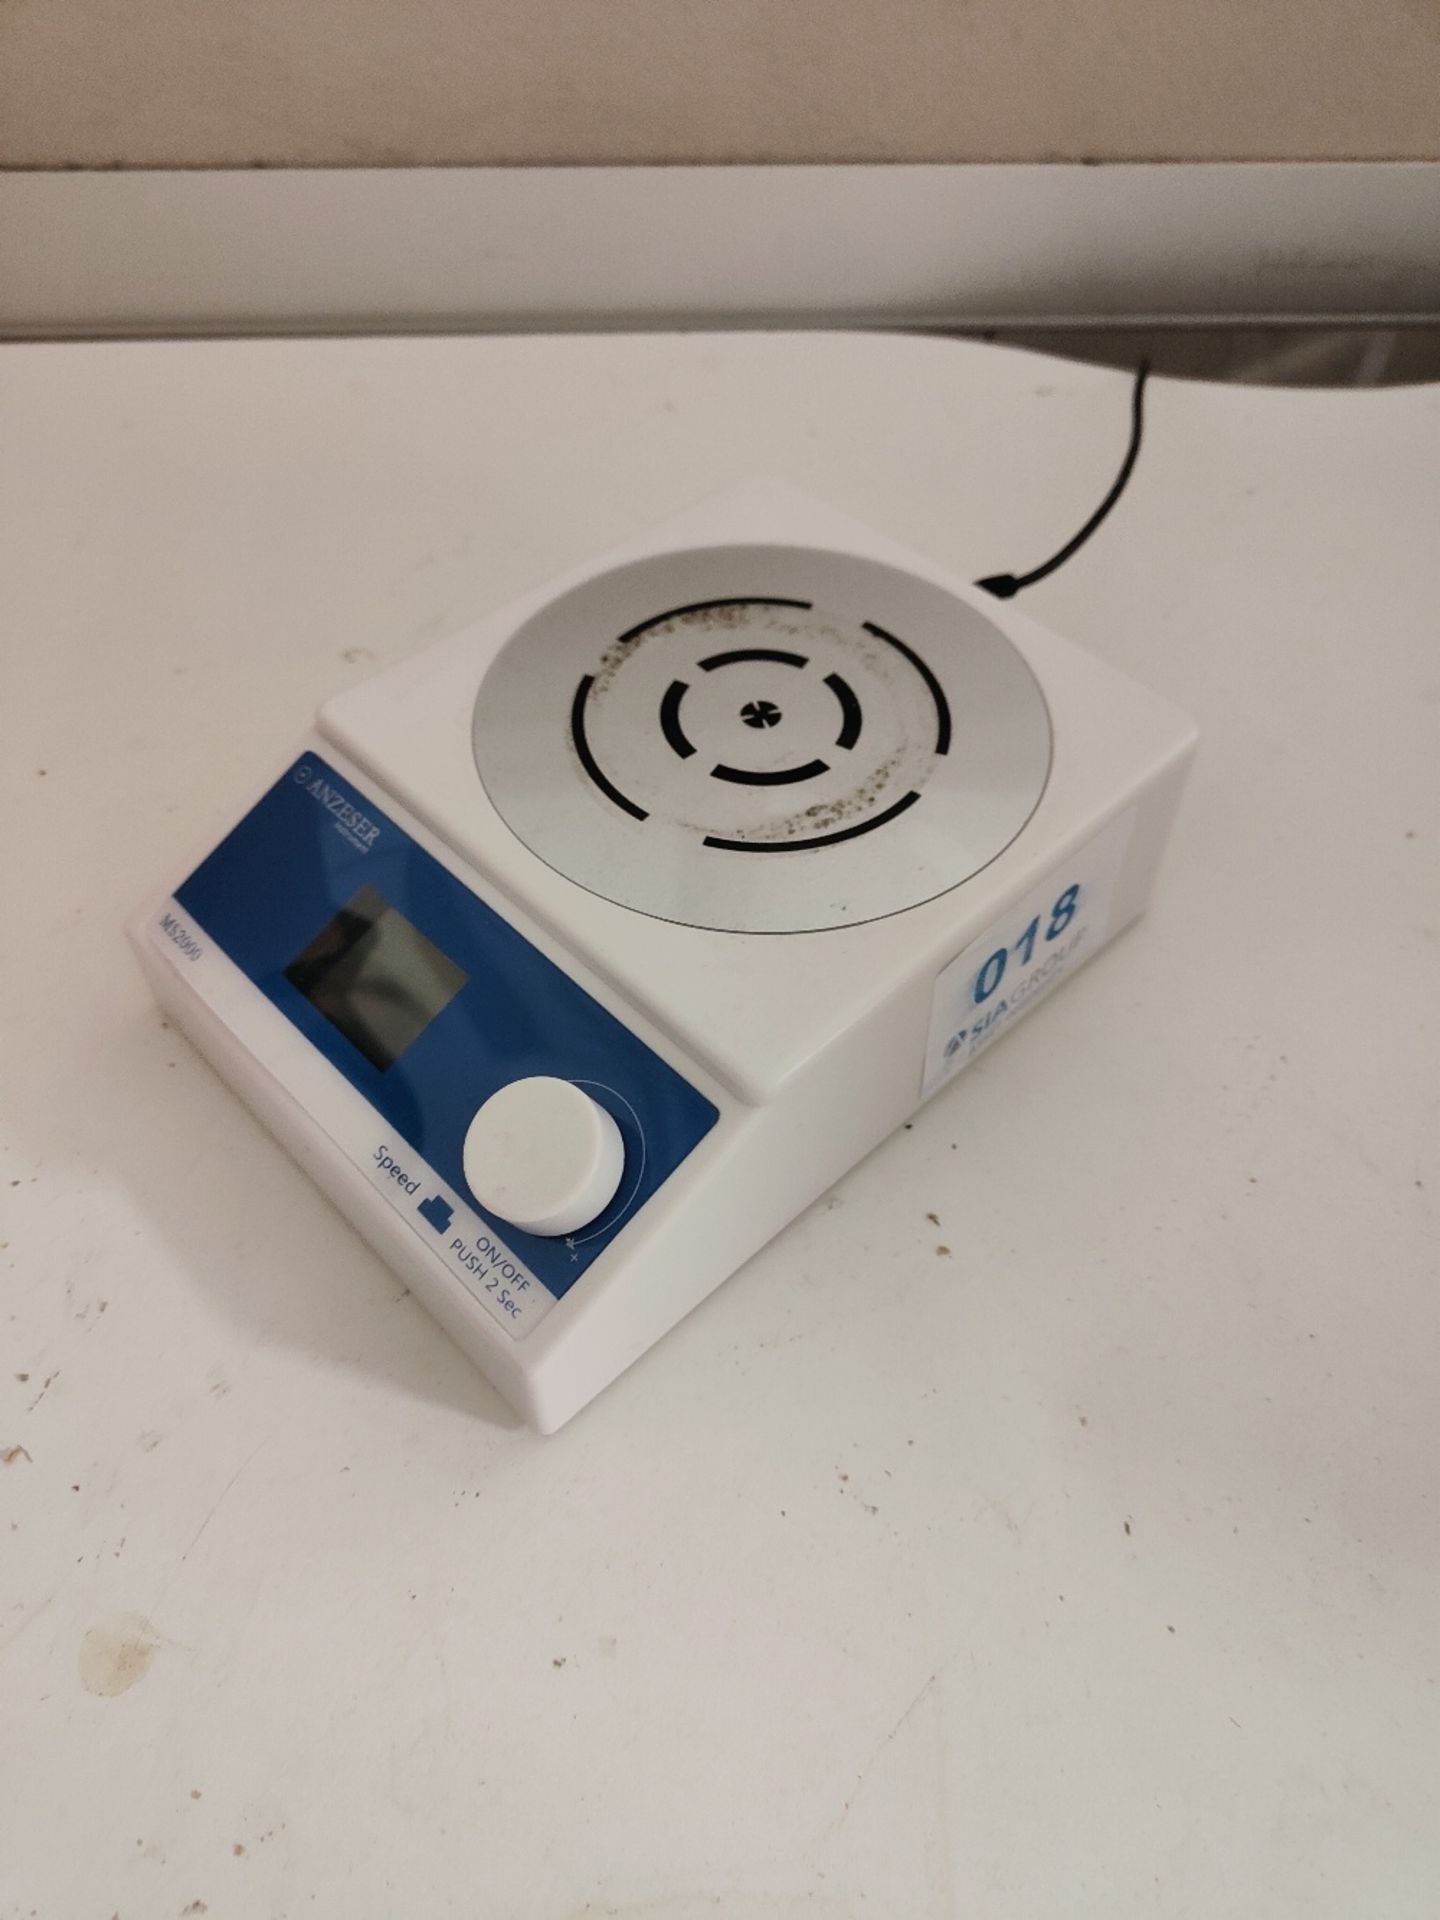 Anzeser Ms2000 Magnetic Stirrer - Image 3 of 4